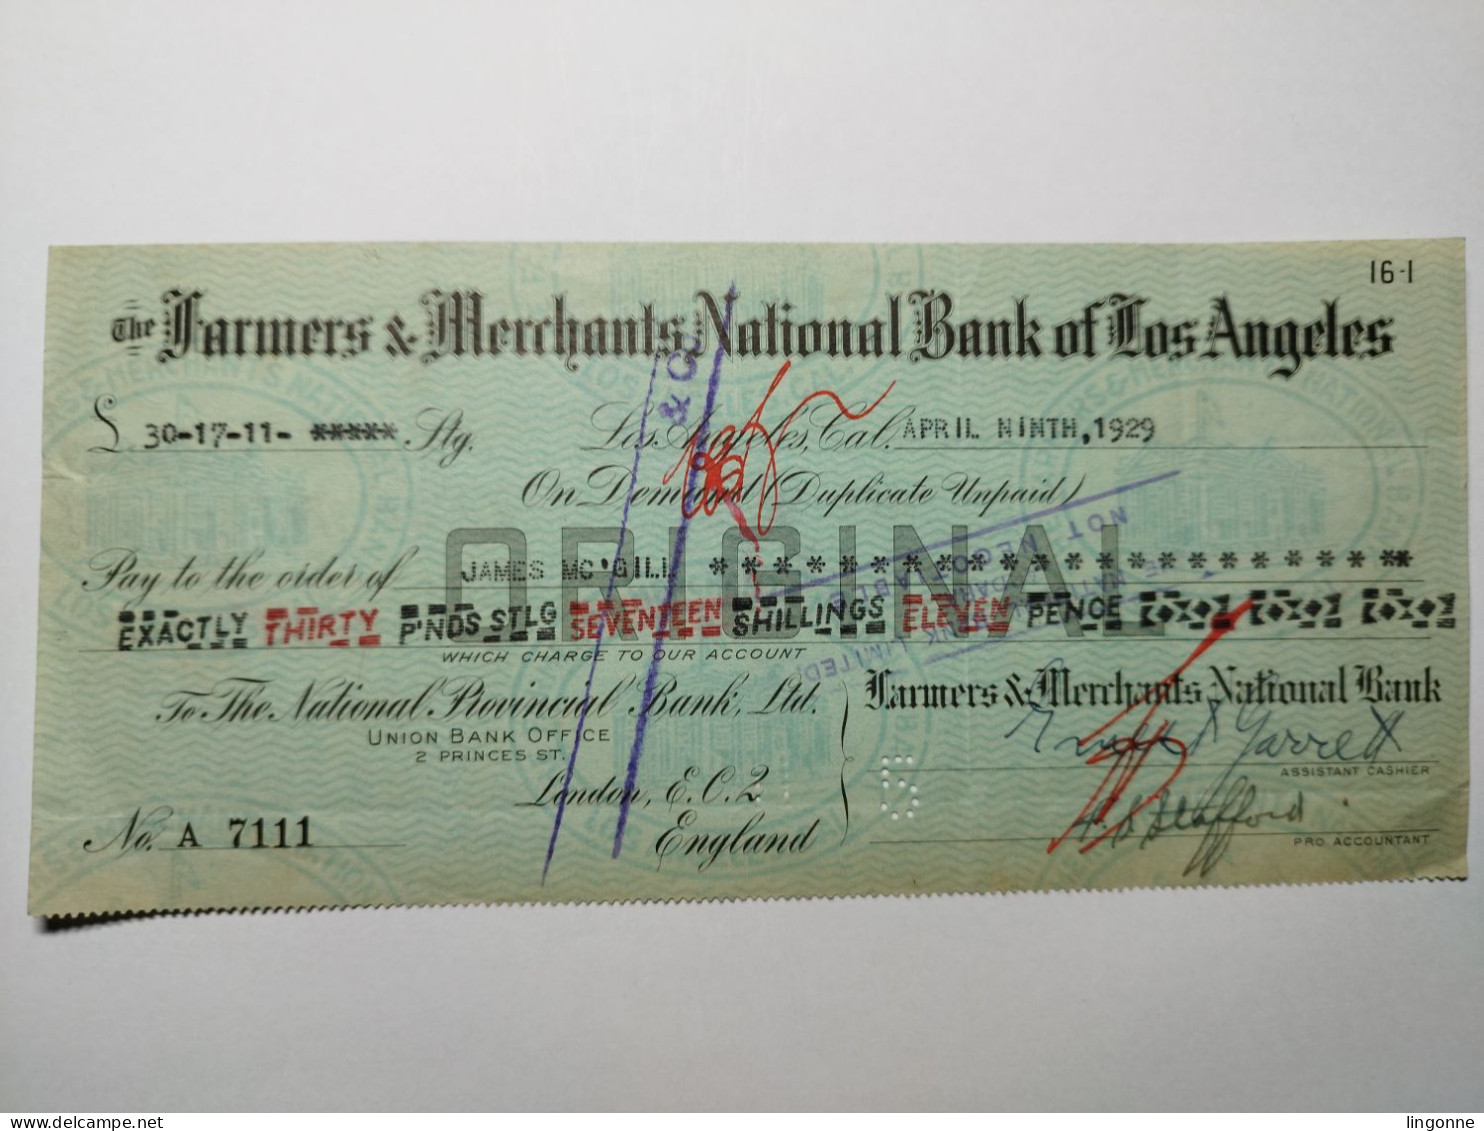 1929 The FARMERS & MERCHANTS NATIONAL BANK OF LOS ANGELES To The National Provincial Bank - EIRE 2 - United States